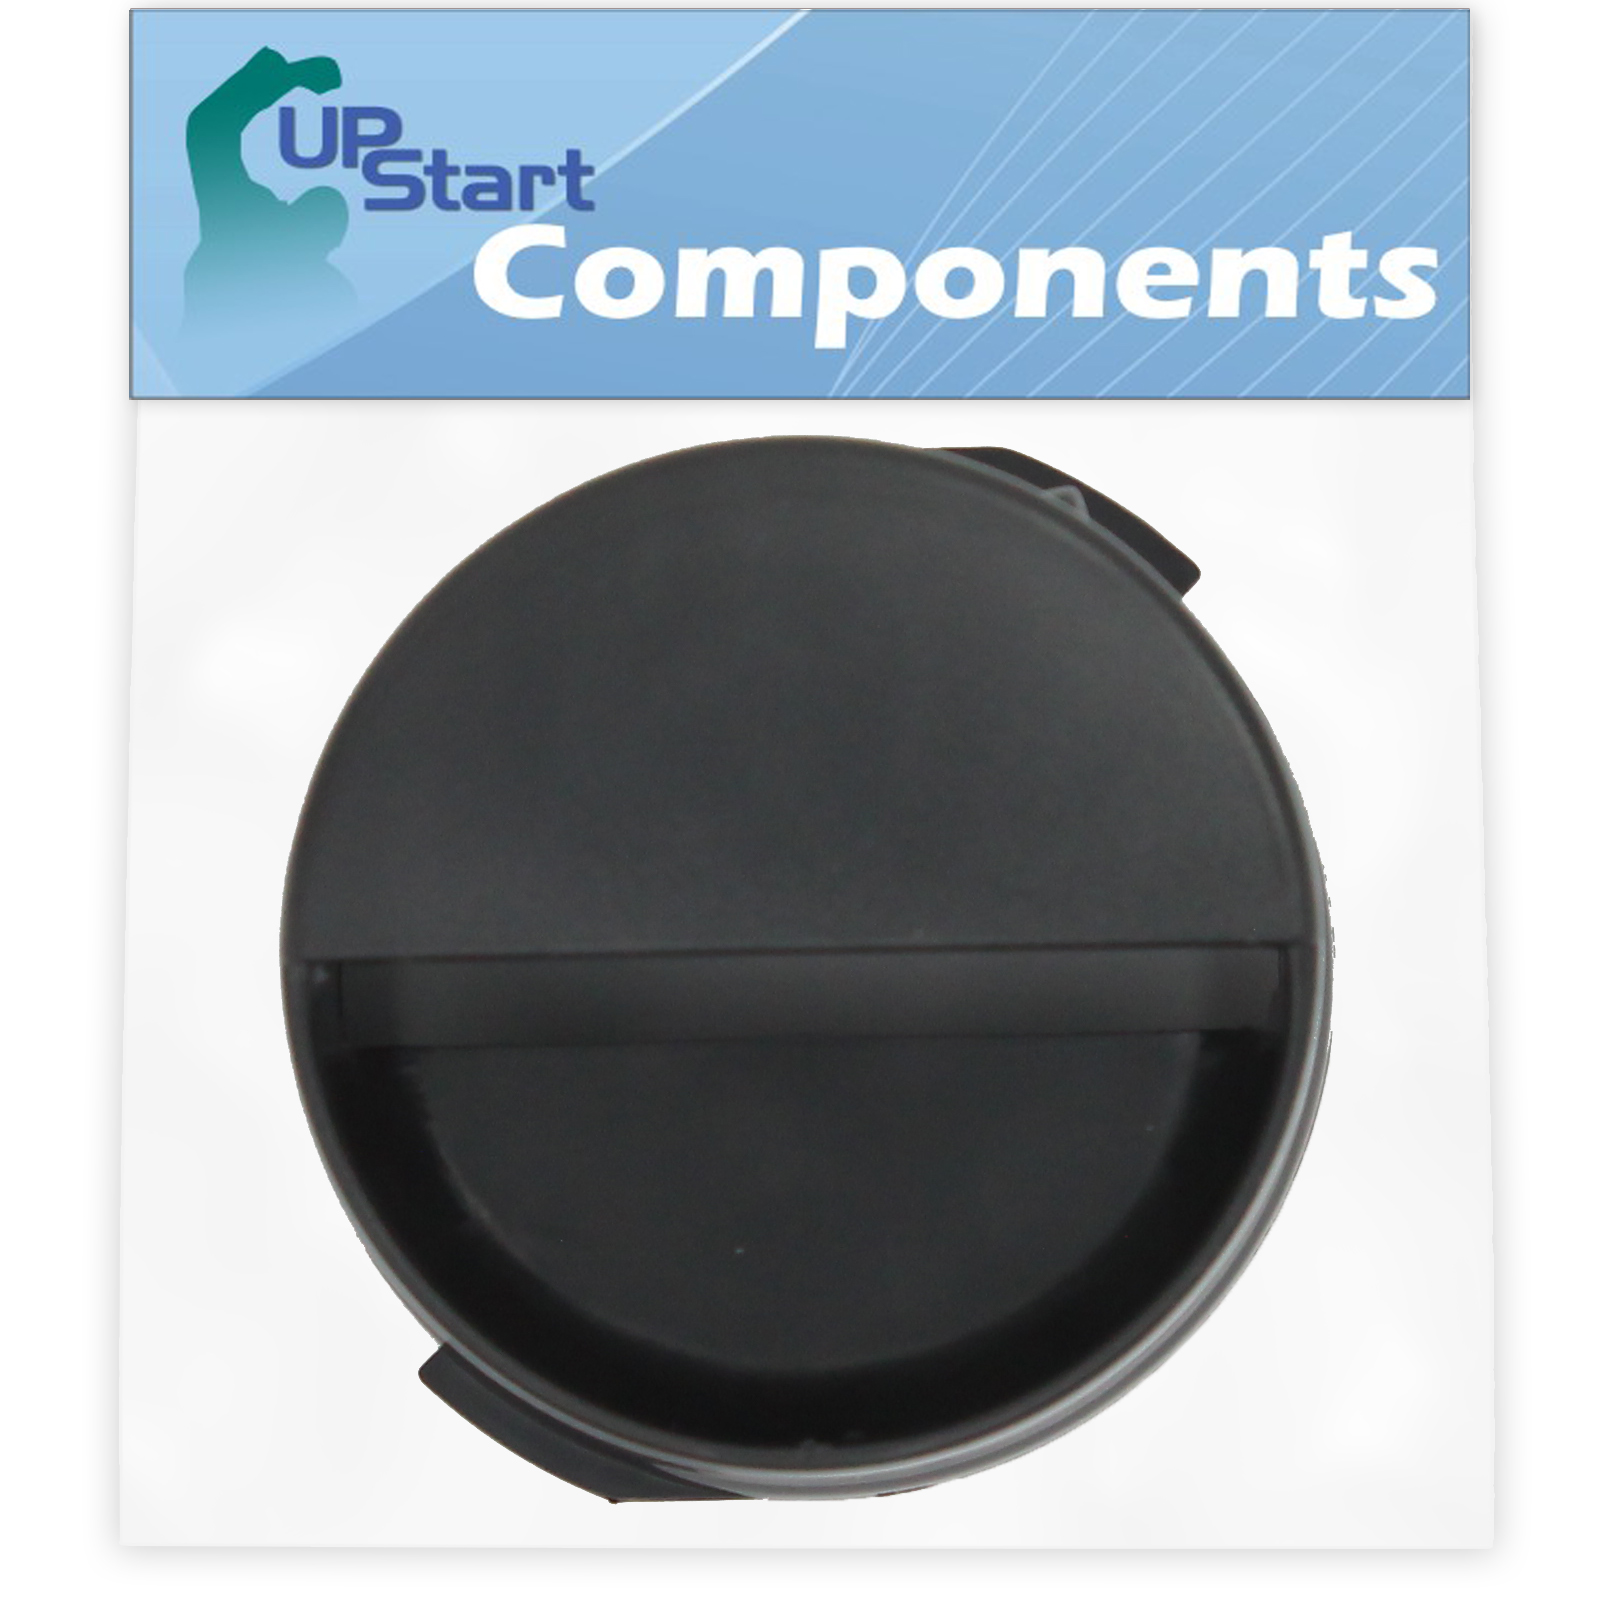 2260502B Refrigerator Water Filter Cap Replacement for KitchenAid KBLO36FTX05 Refrigerator - Compatible with WP2260518B Black Water Filter Cap - UpStart Components Brand - image 1 of 4